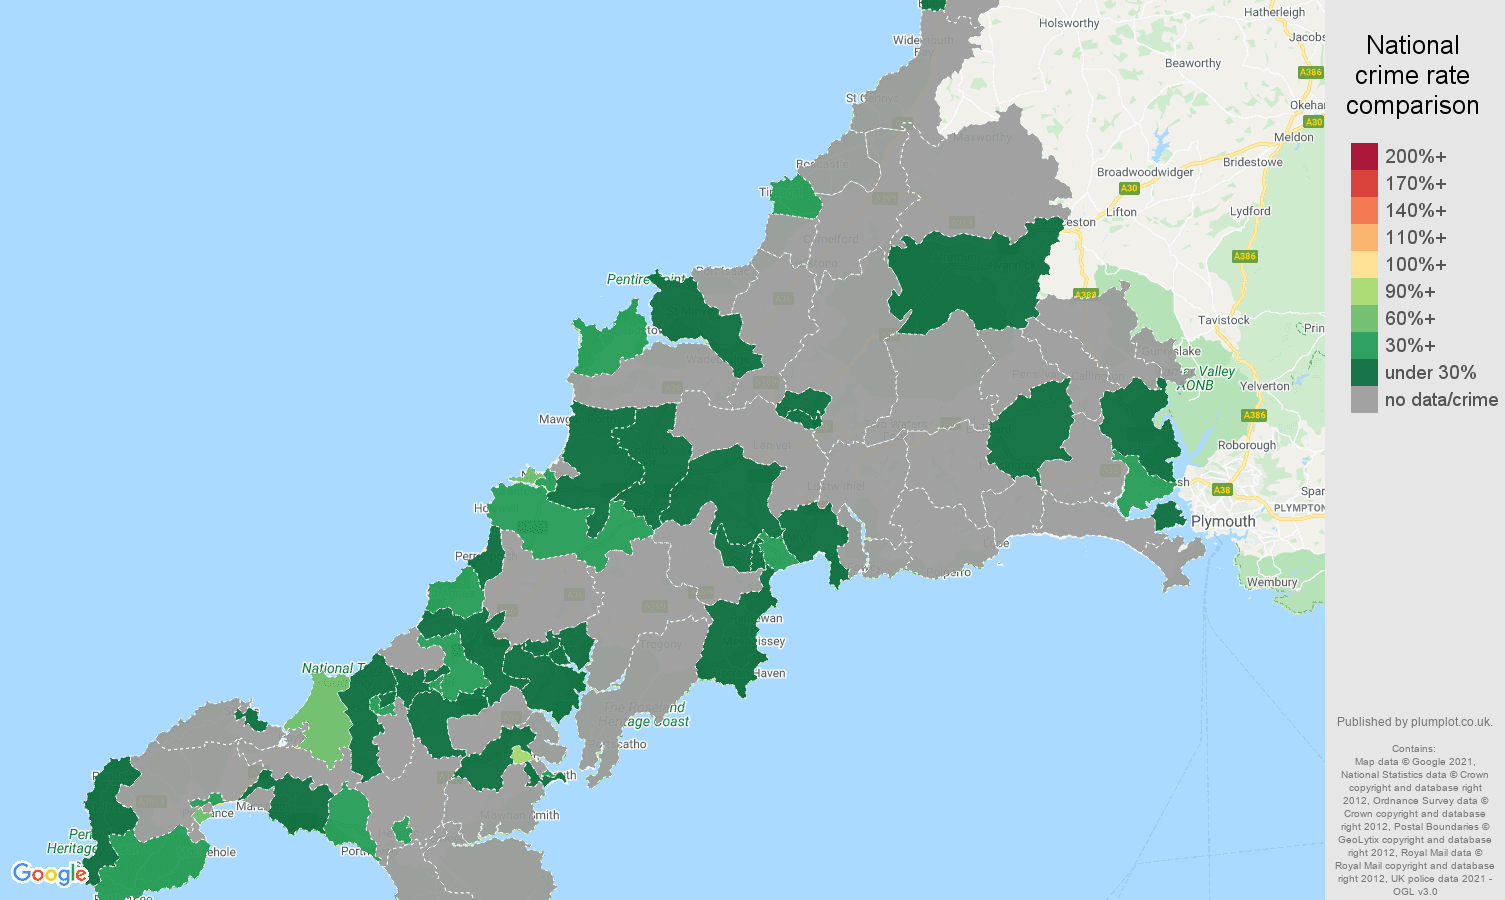 Cornwall bicycle theft crime rate comparison map